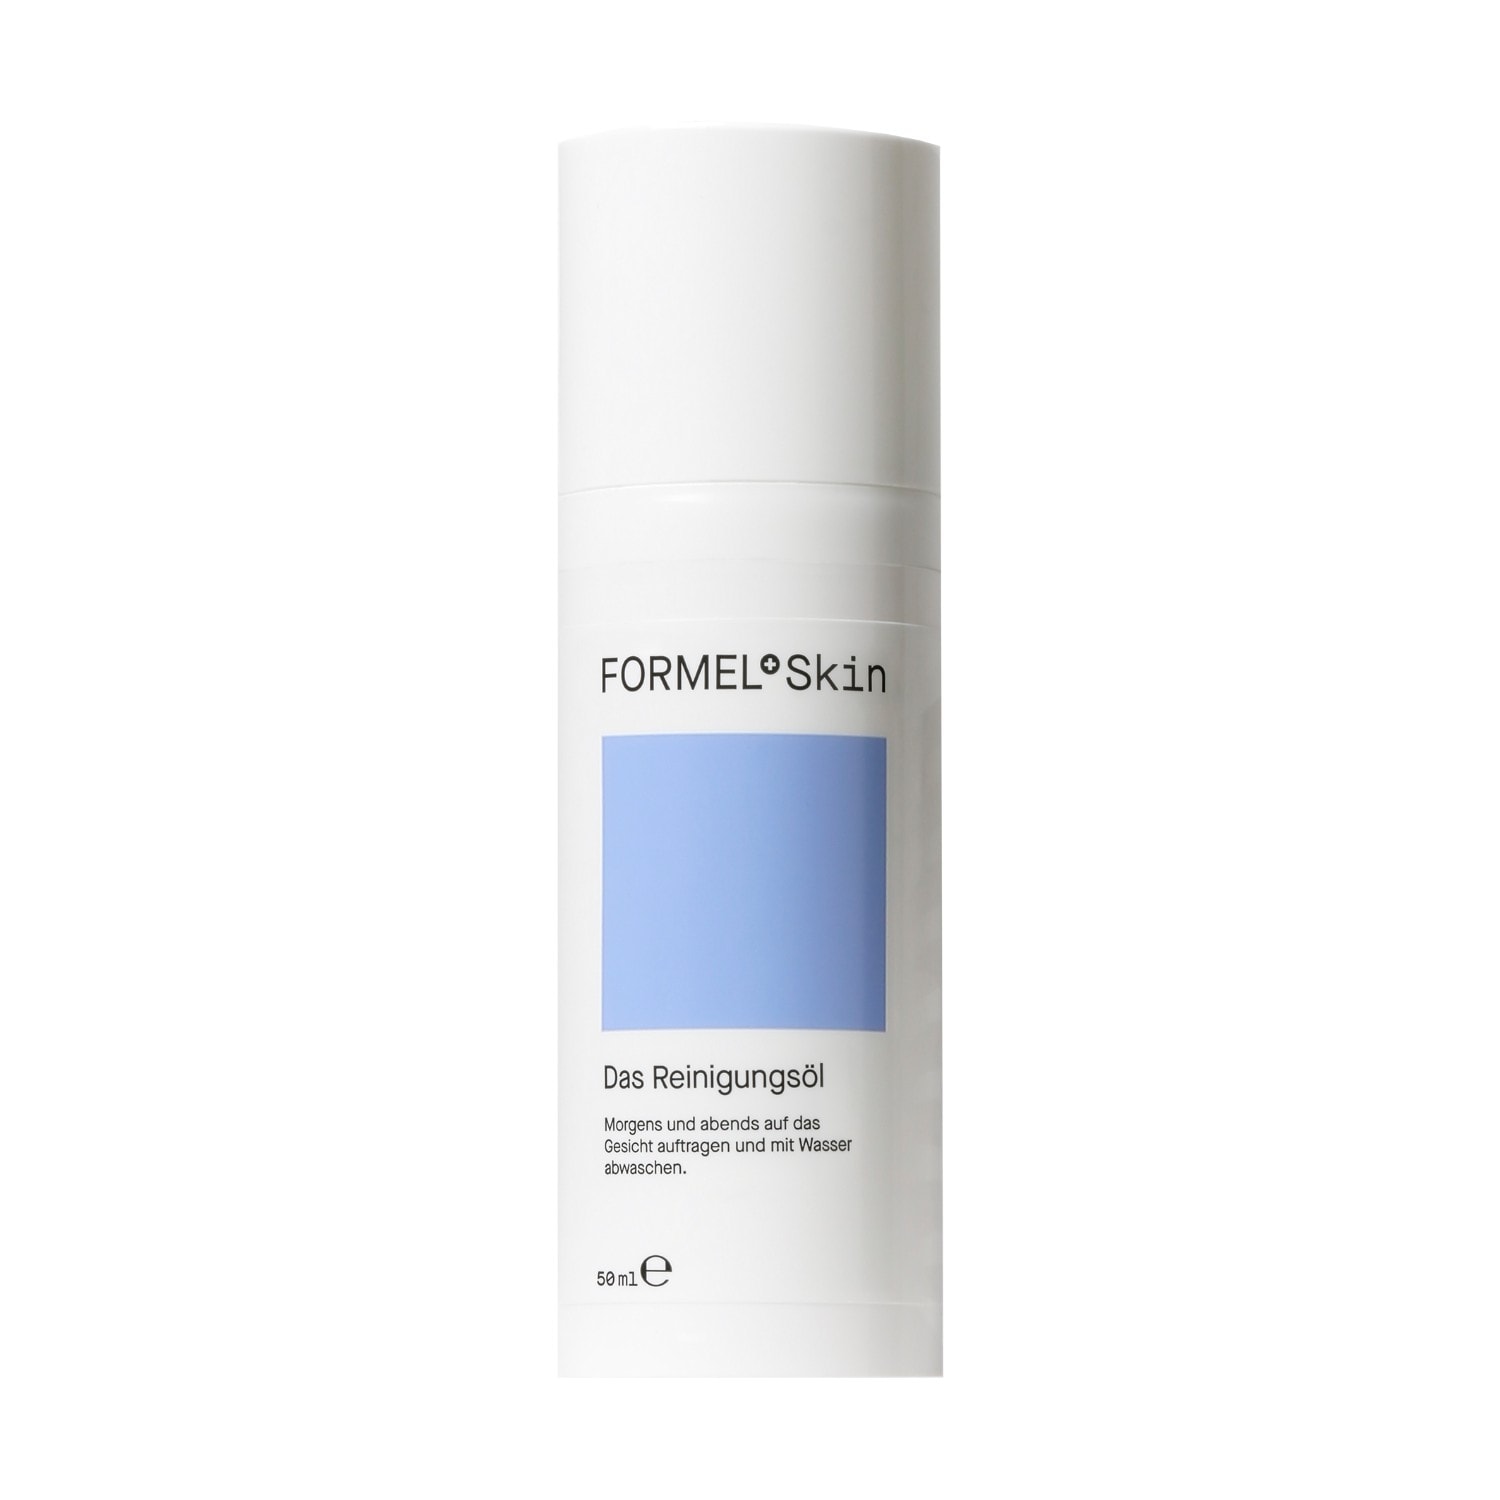 FORMEL Skin The cleansing oil